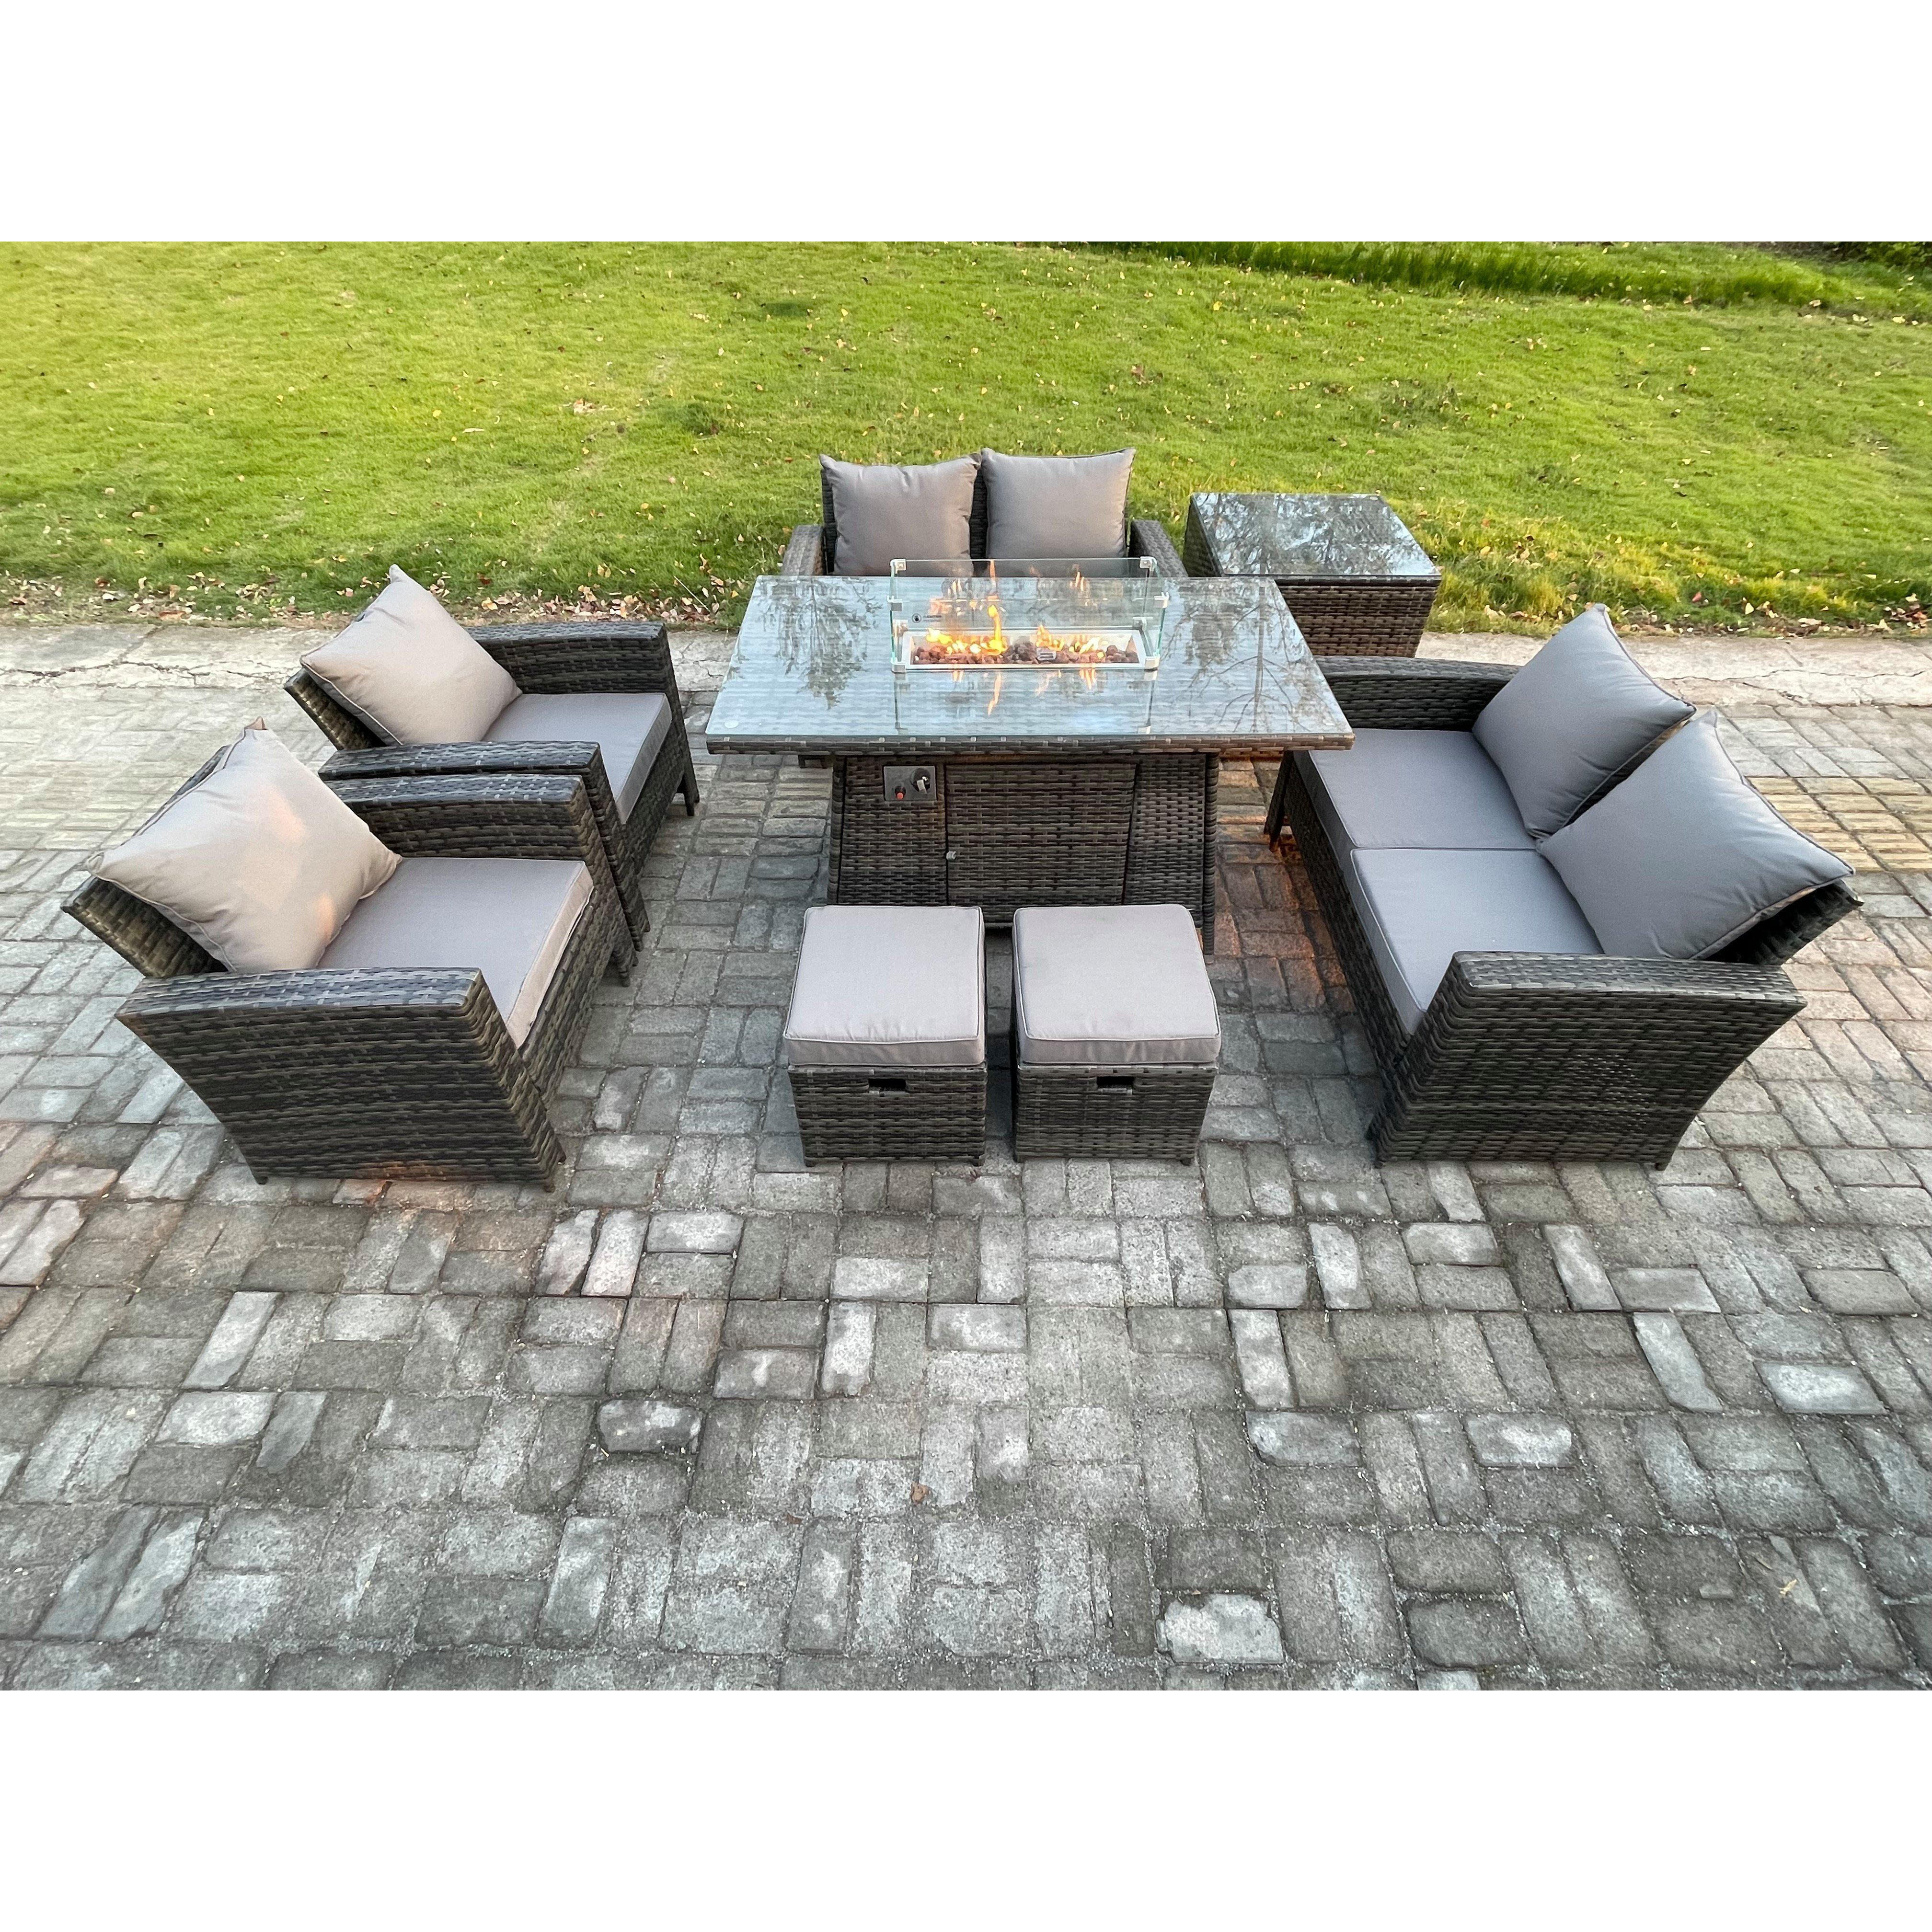 Wicker PE Rattan Garden Furniture Sets 8 Seater Patio Outdoor Gas Firepit Dining Table Heater Set with Double Seat Sofa - image 1